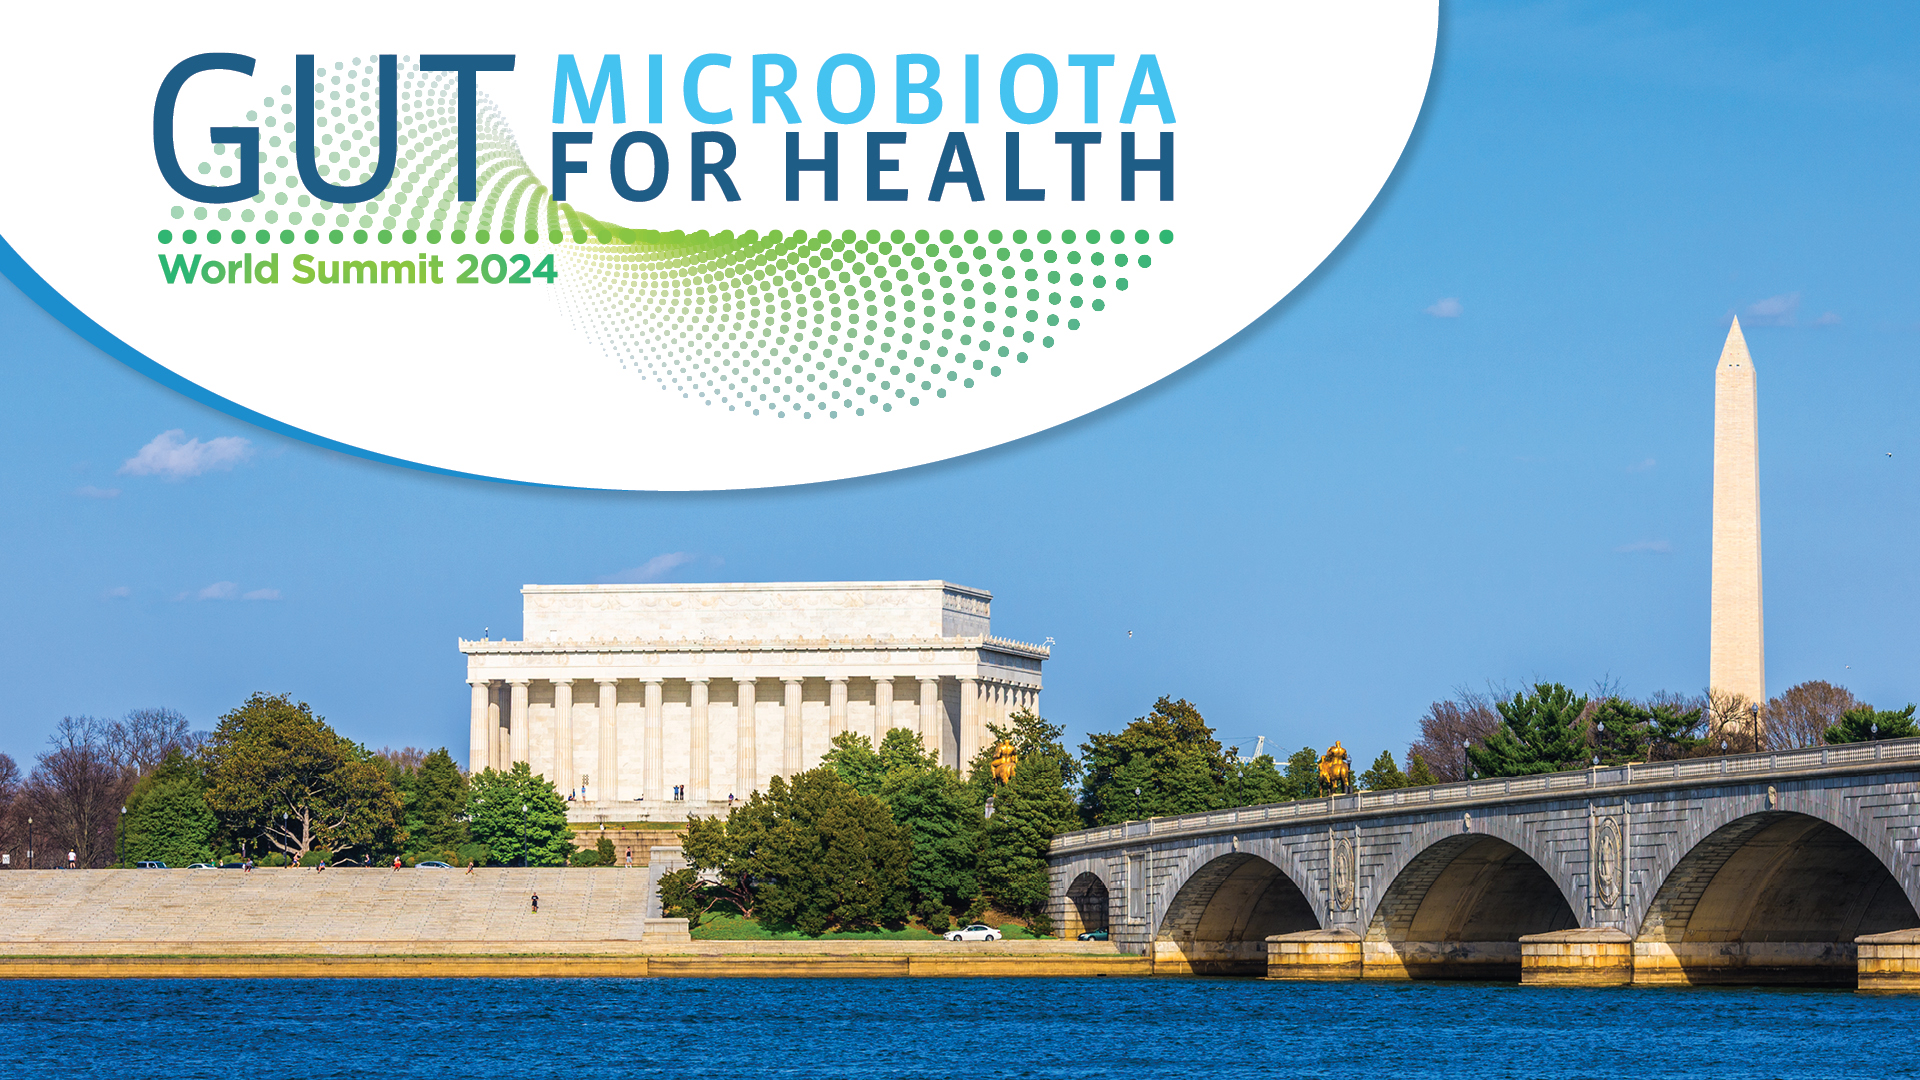 2024 Gut Microbiota for Health World Summit explores the clinical